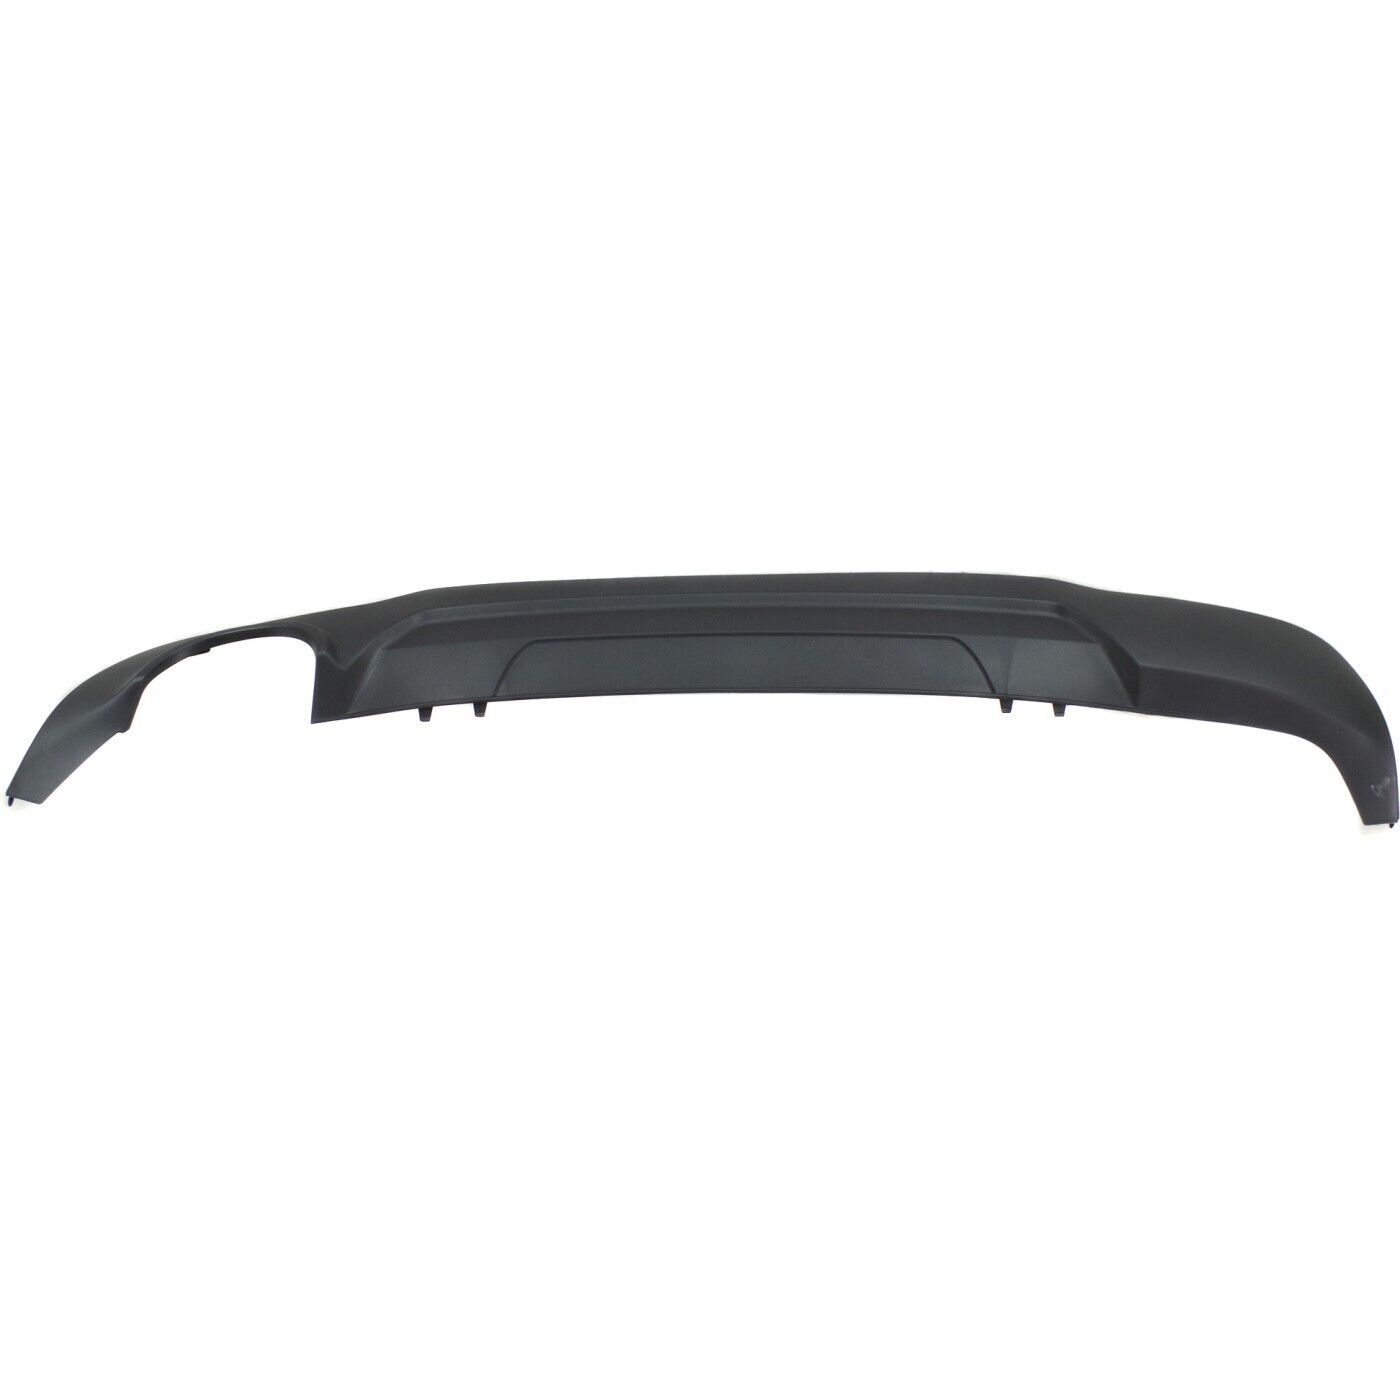 2012-2014 MERCEDES-BENZ C-CLASS; Rear Bumper Cover lower; Air dam C250 W204 SDN/CPE RWD w/Sport Pkg Painted to Match